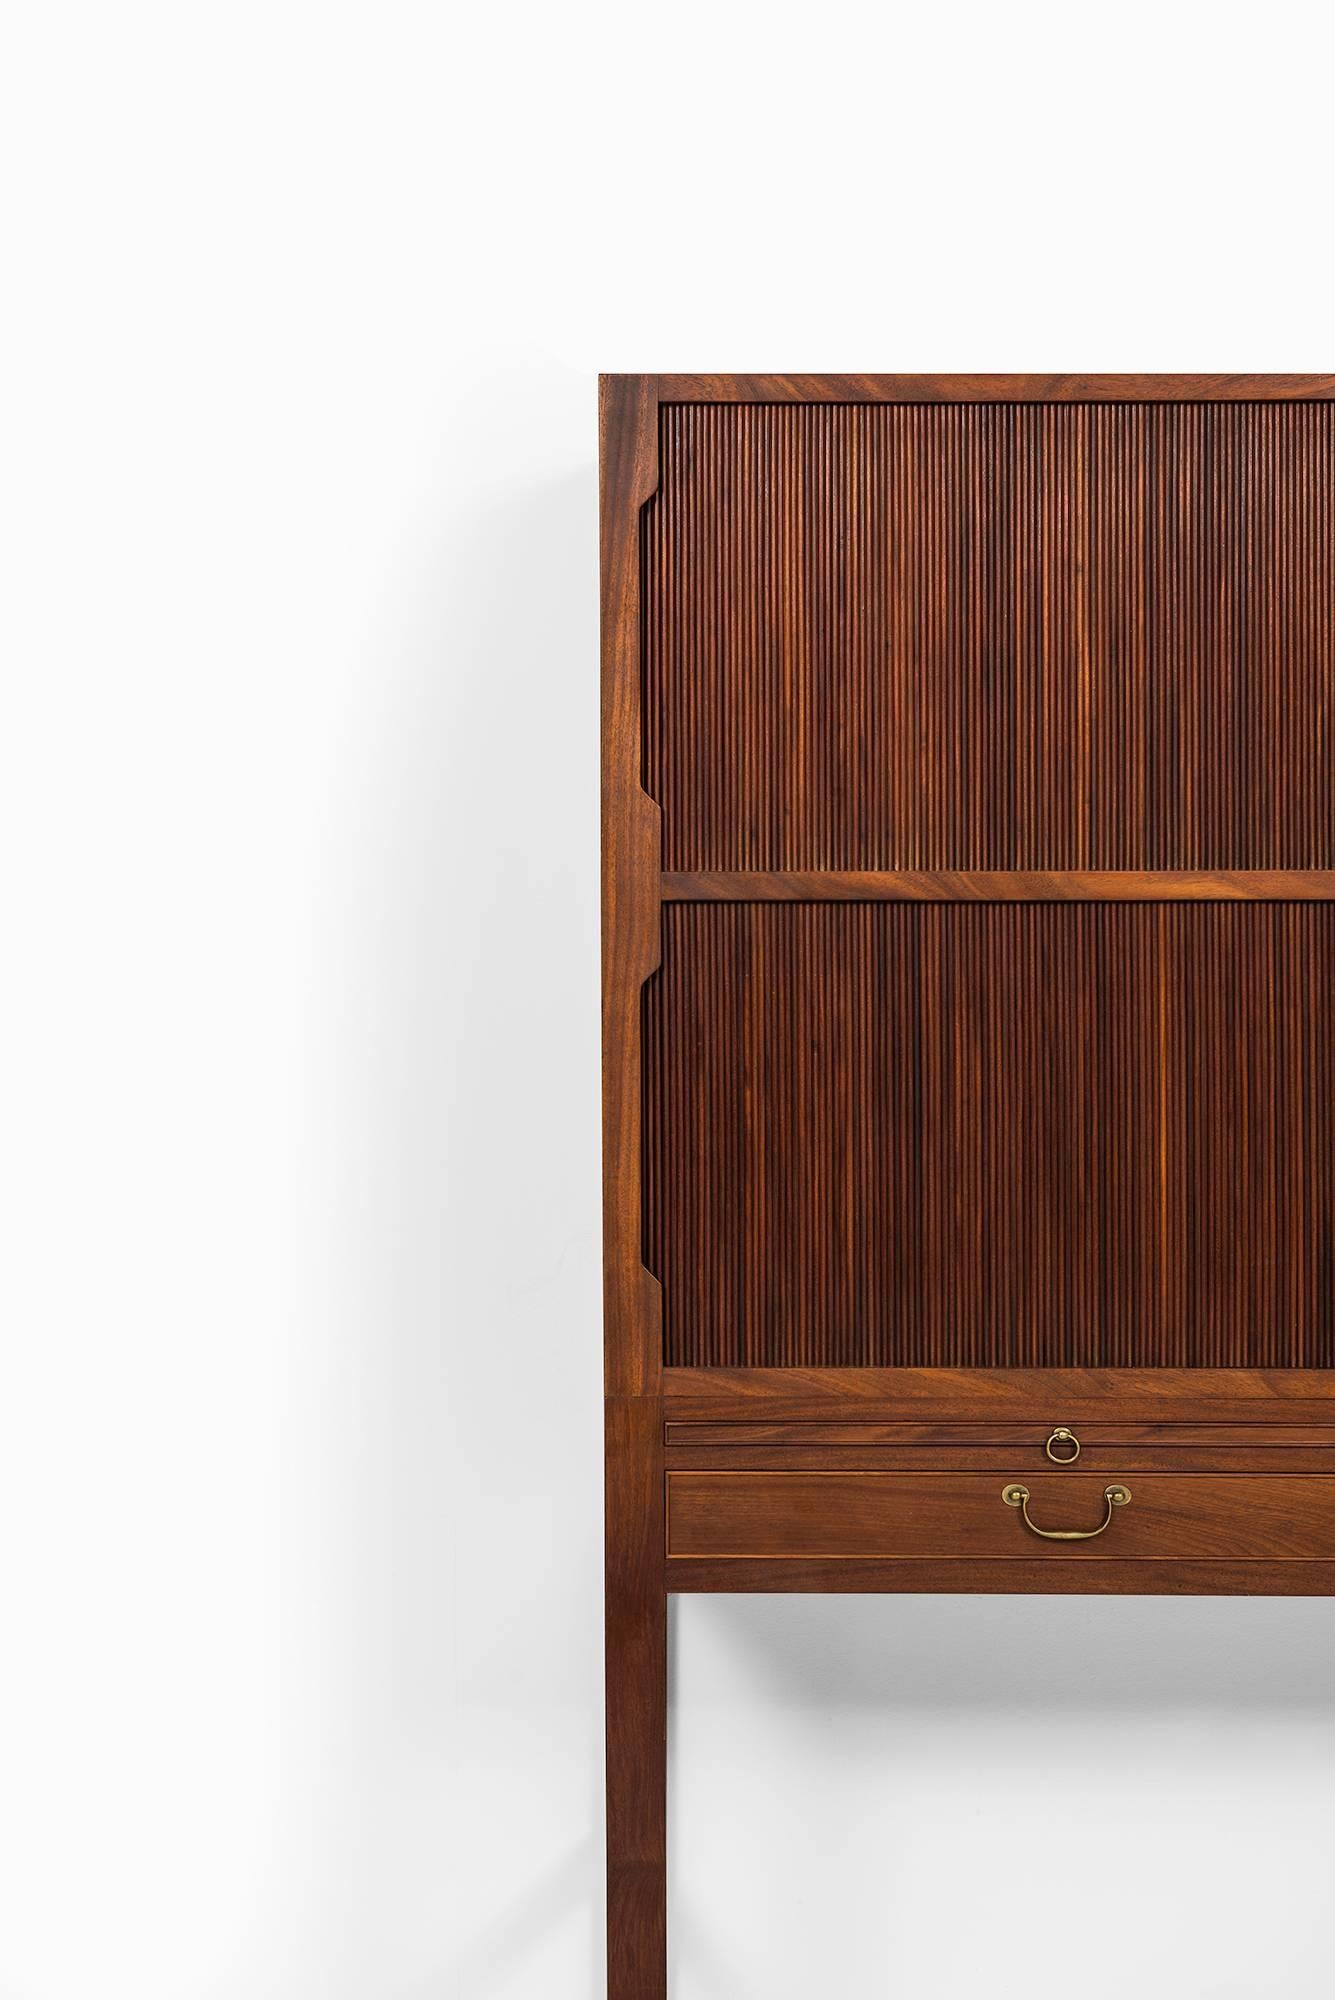 Rare cabinet designed by Ole Wanscher. Produced by A.J. Iversen in Denmark.